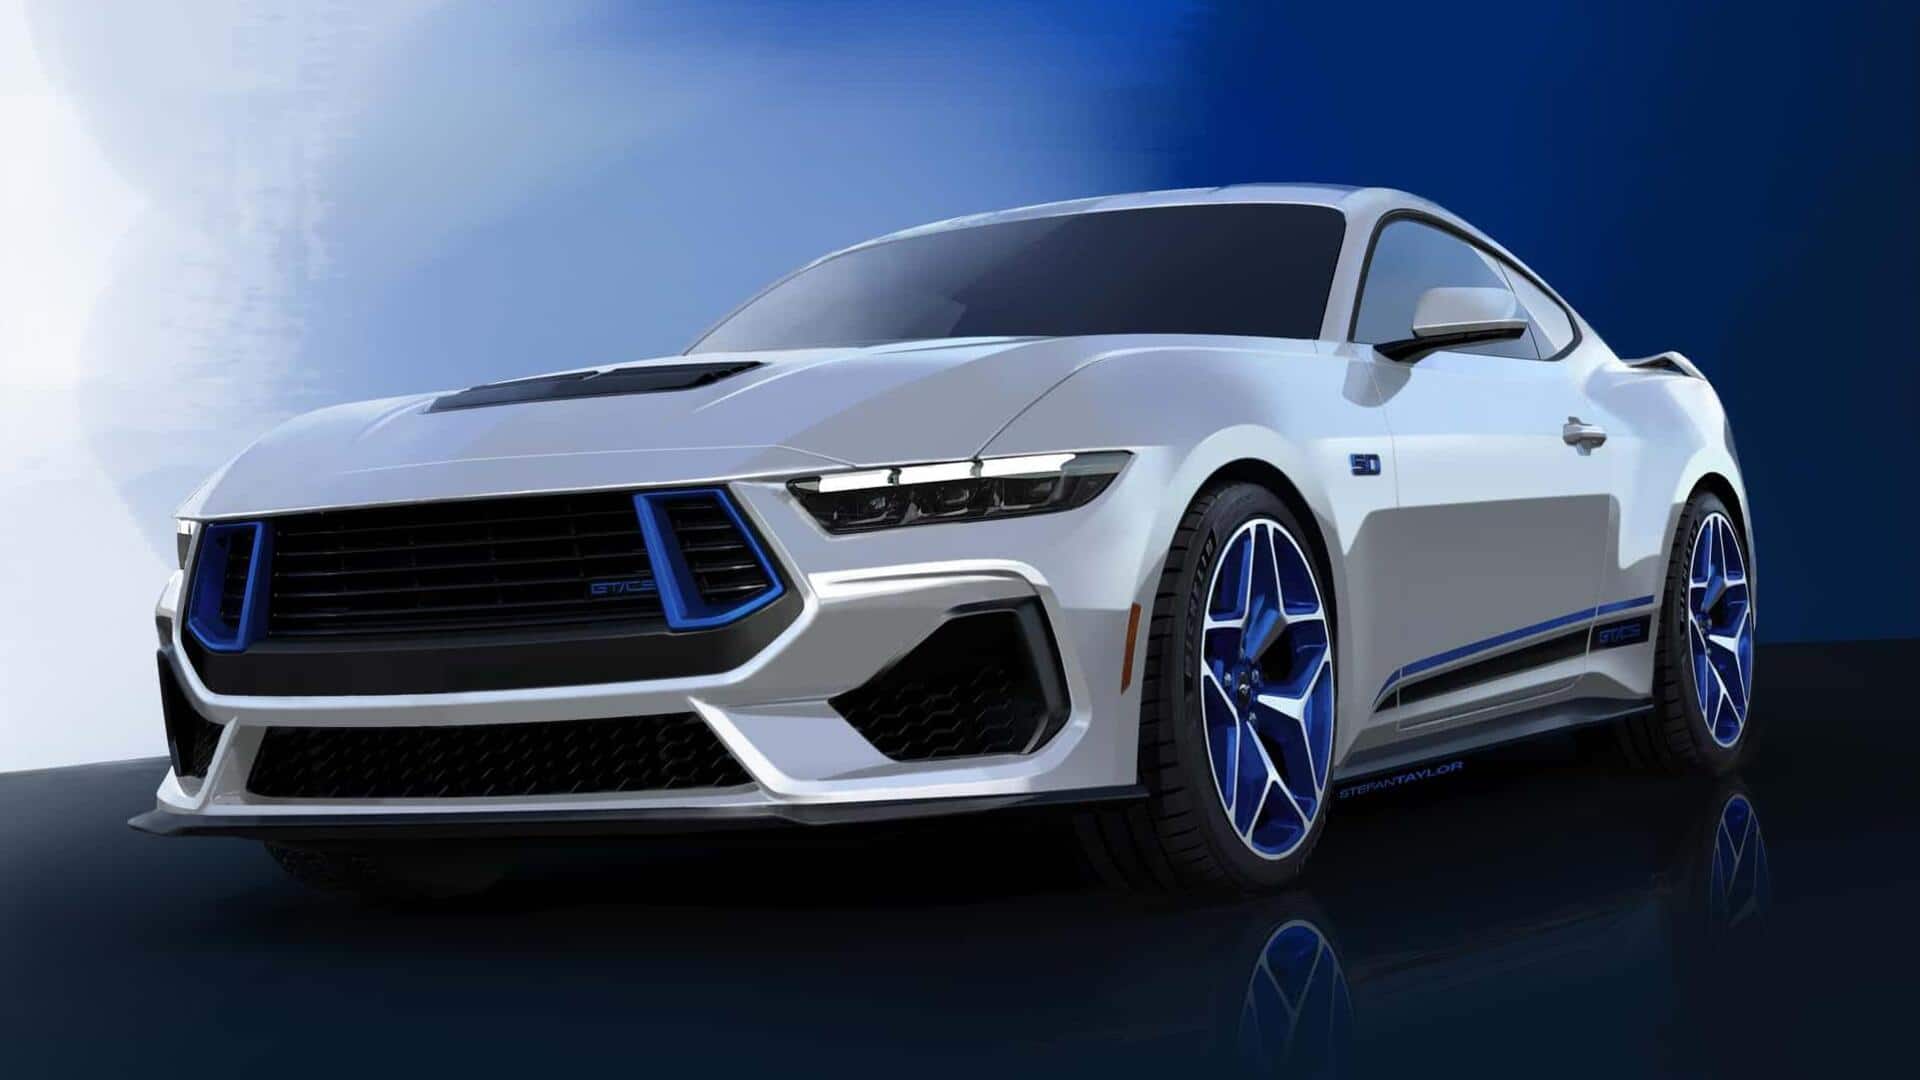 Retro-inspired Ford Mustang GT California Special debuts: Check features